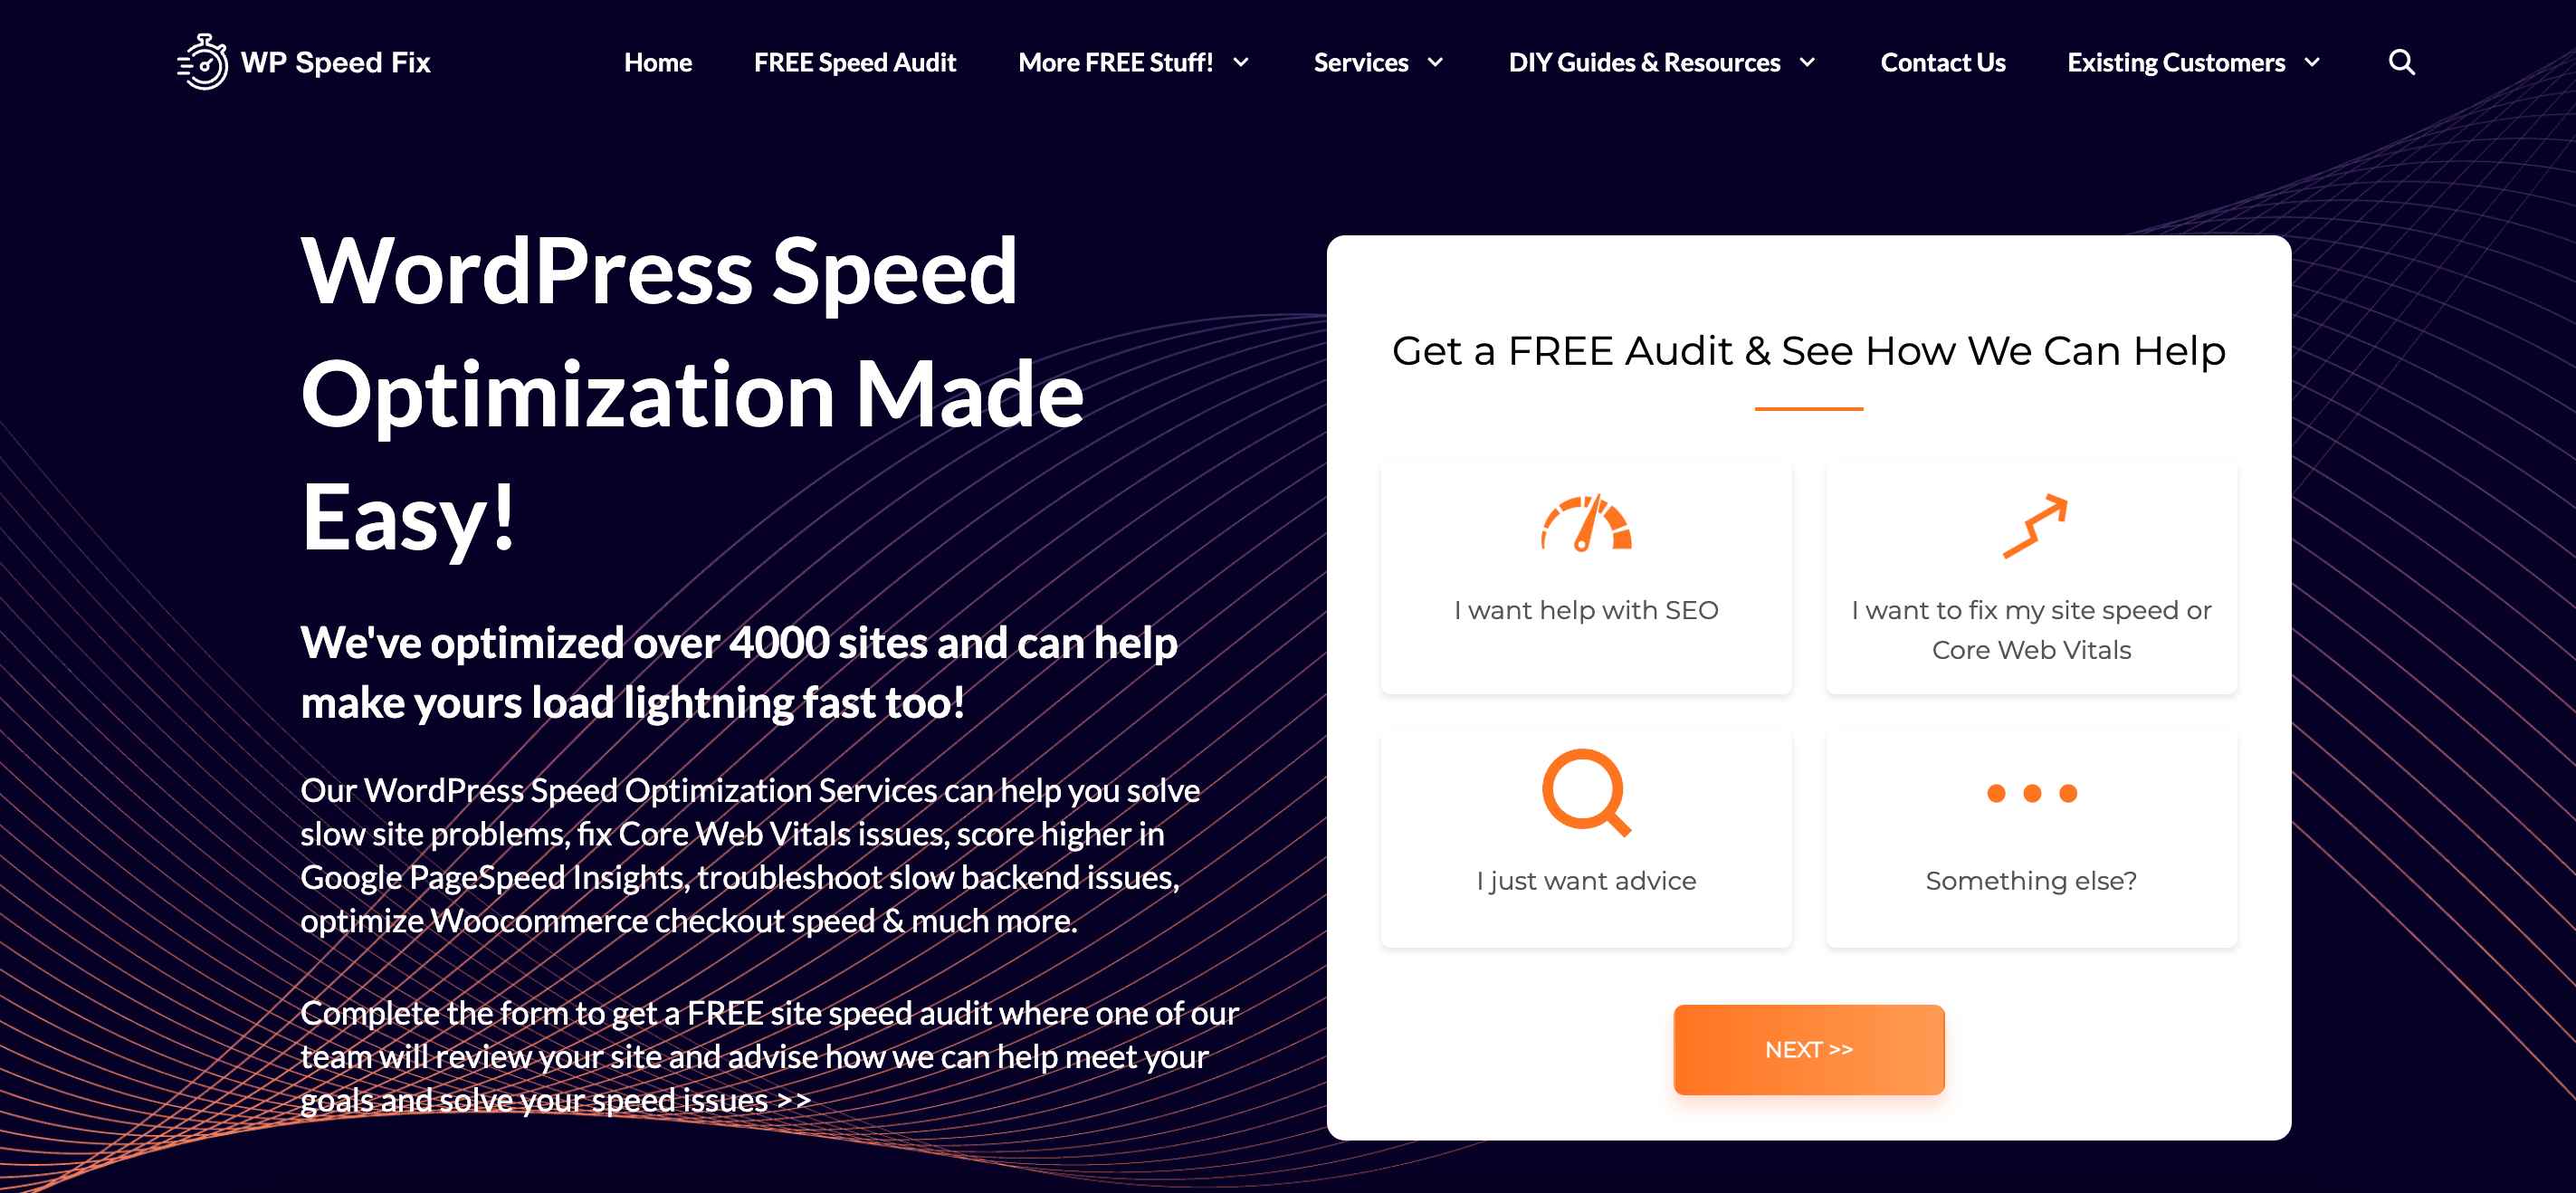 WP Speed Fix is one of the great WordPress site speed optimization services